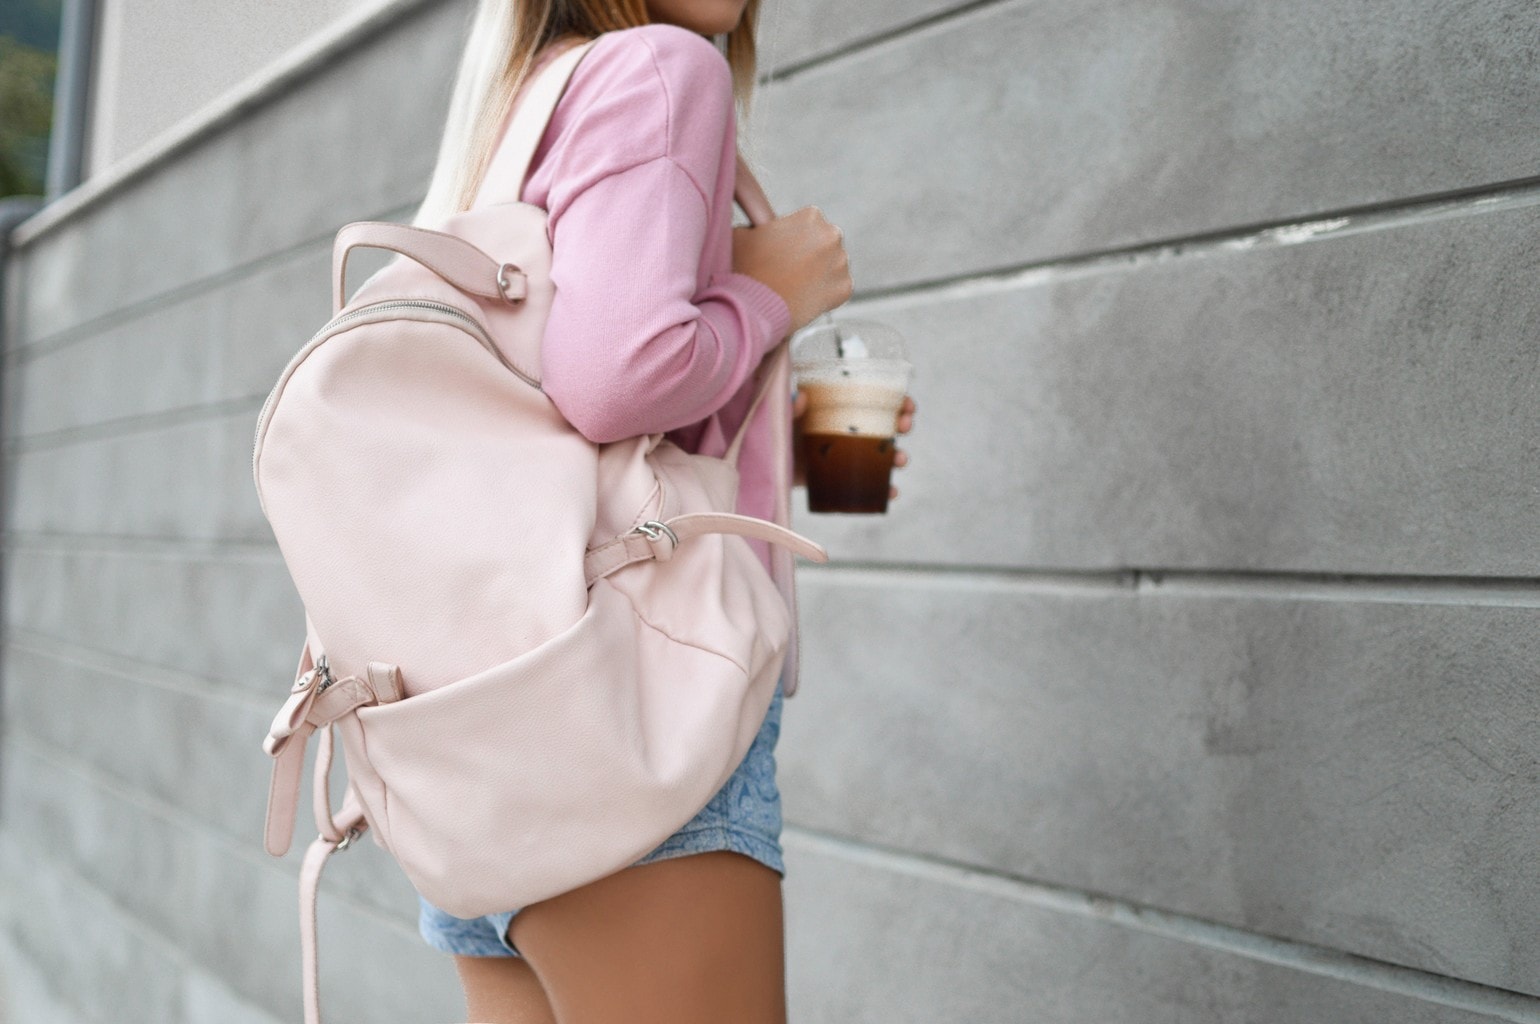 Cute College Outfits: 10 Looks to Get You Back-to-School Ready